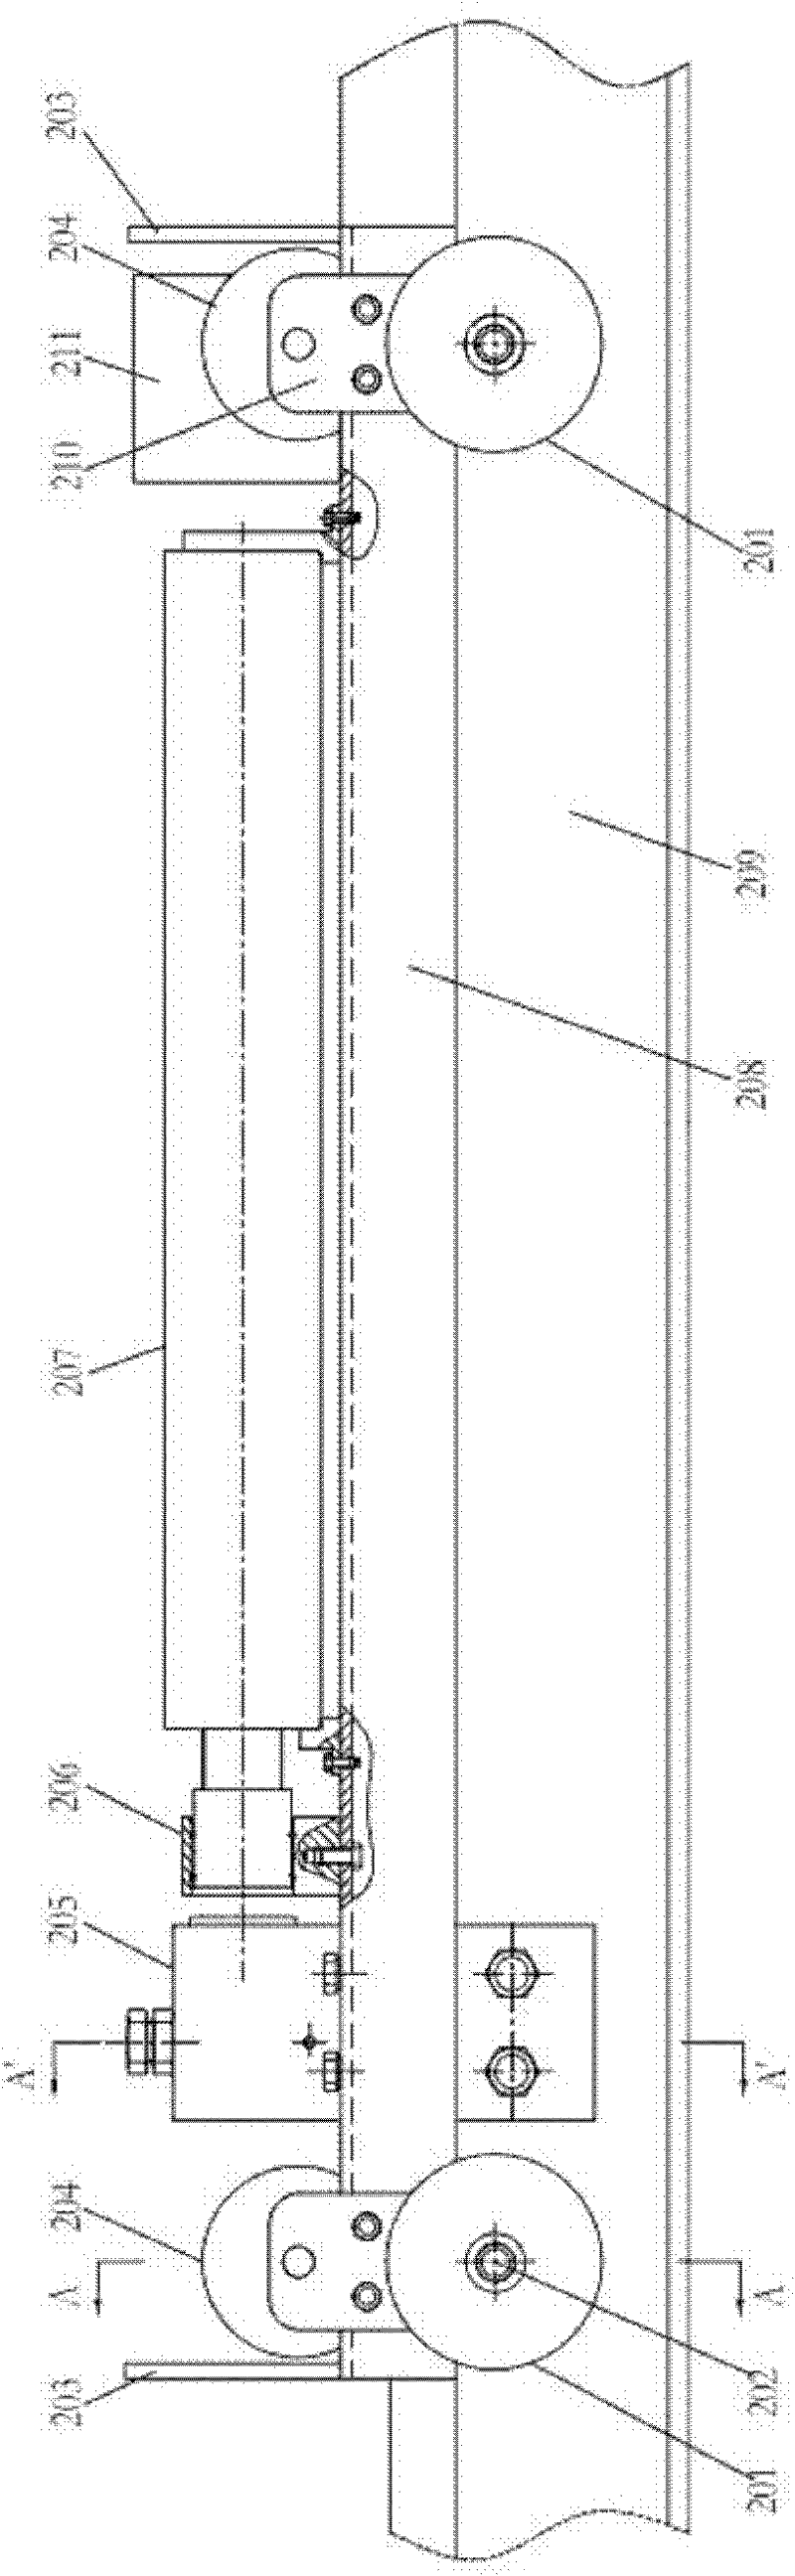 Stress-relieving device for seamless rails by using excitation method, and the relieving method